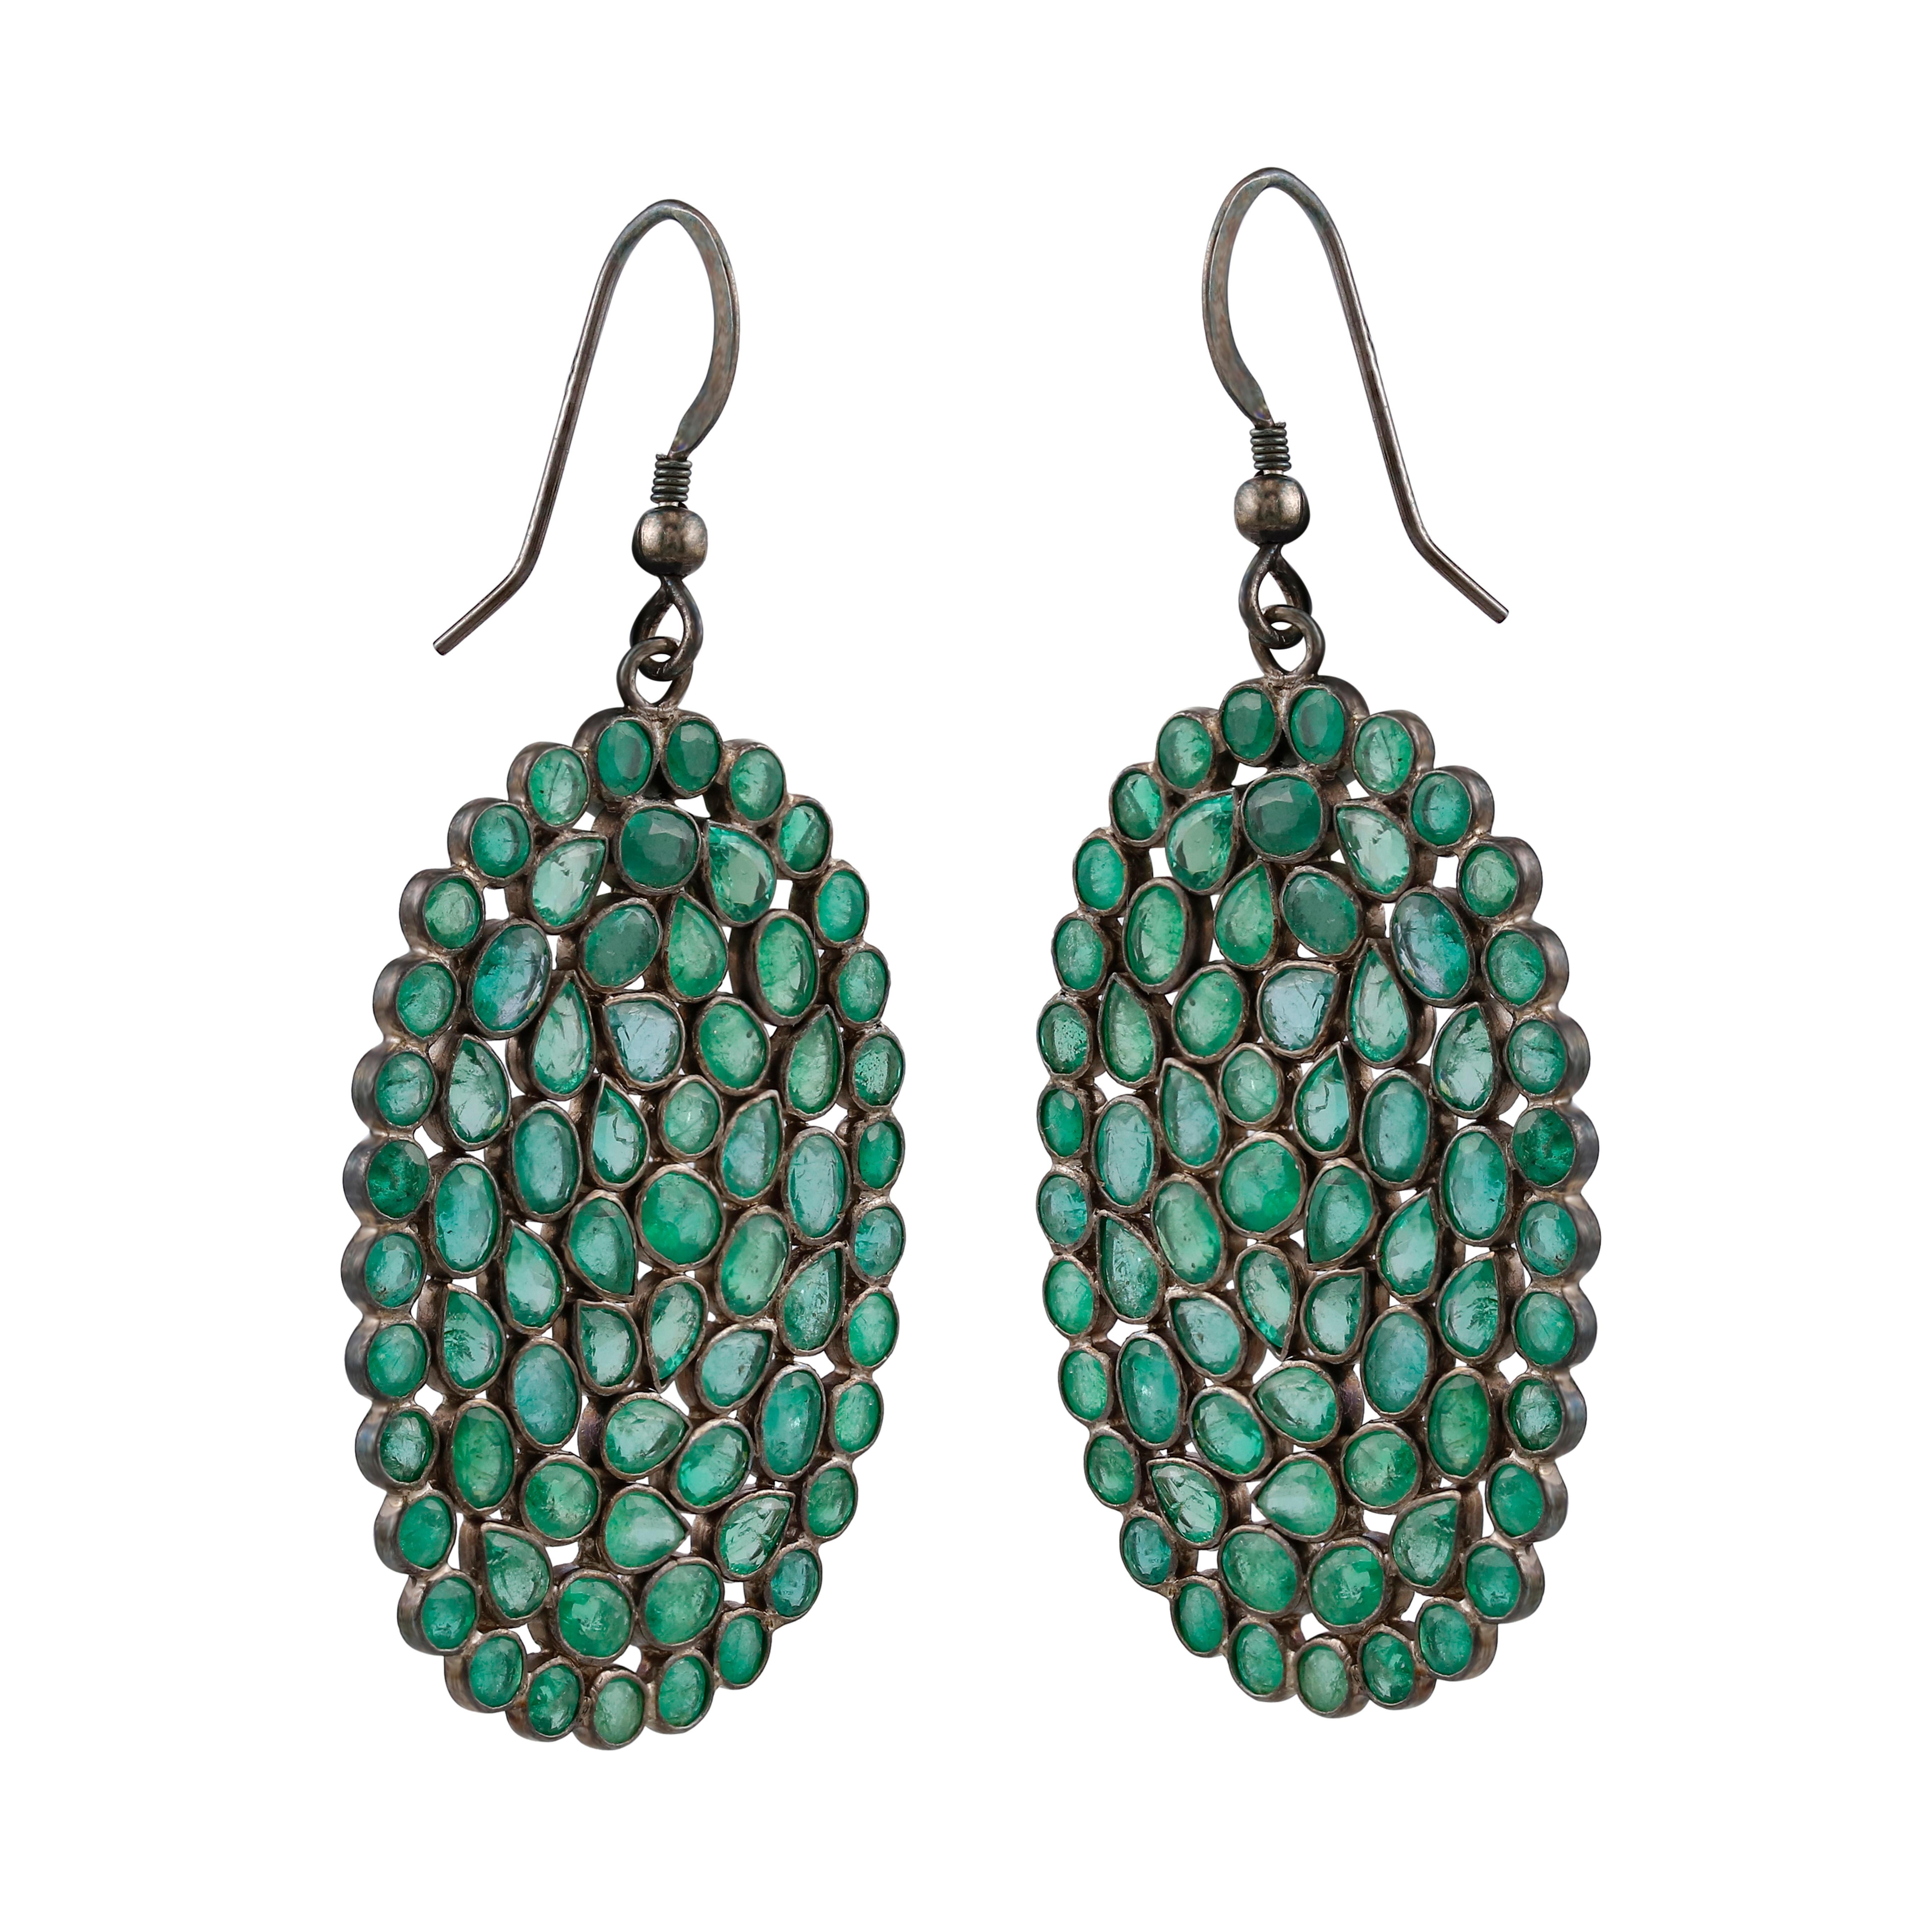 These sparkling danglers each include a great assortment of stones. These vibrant emerald gemstones are wonderful, arranged in pretty oval shapes. These earrings are handmade in sterling silver and are accompanied with lever backs.

Please follow